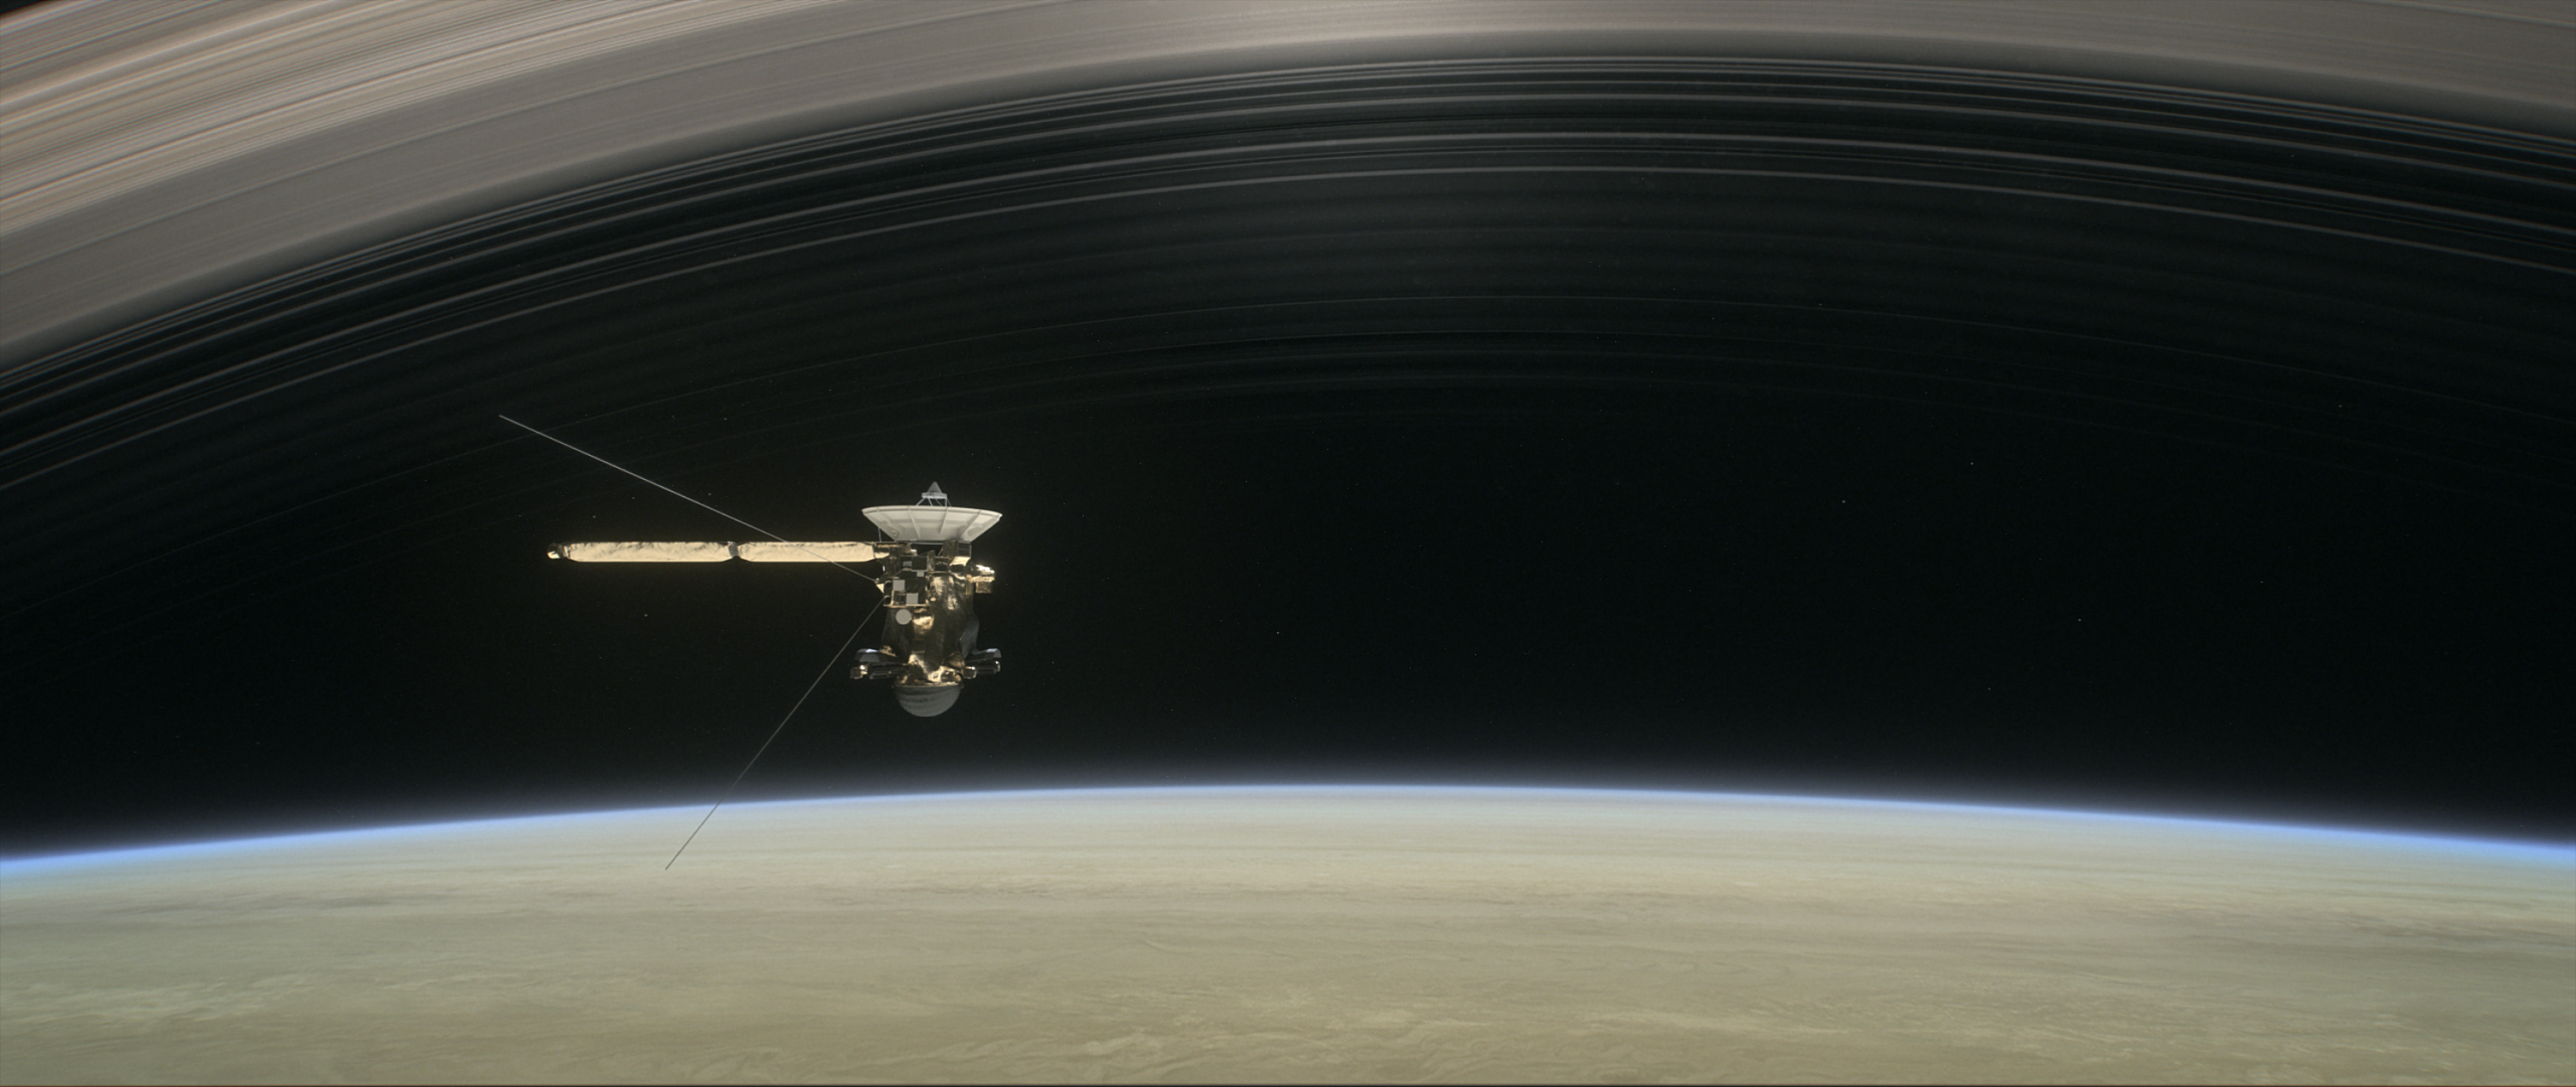 Artist's concept of the Cassini spacecraft diving between Saturn and its innermost ring. Cassini's mission ended by plunging into Saturn in 2017.